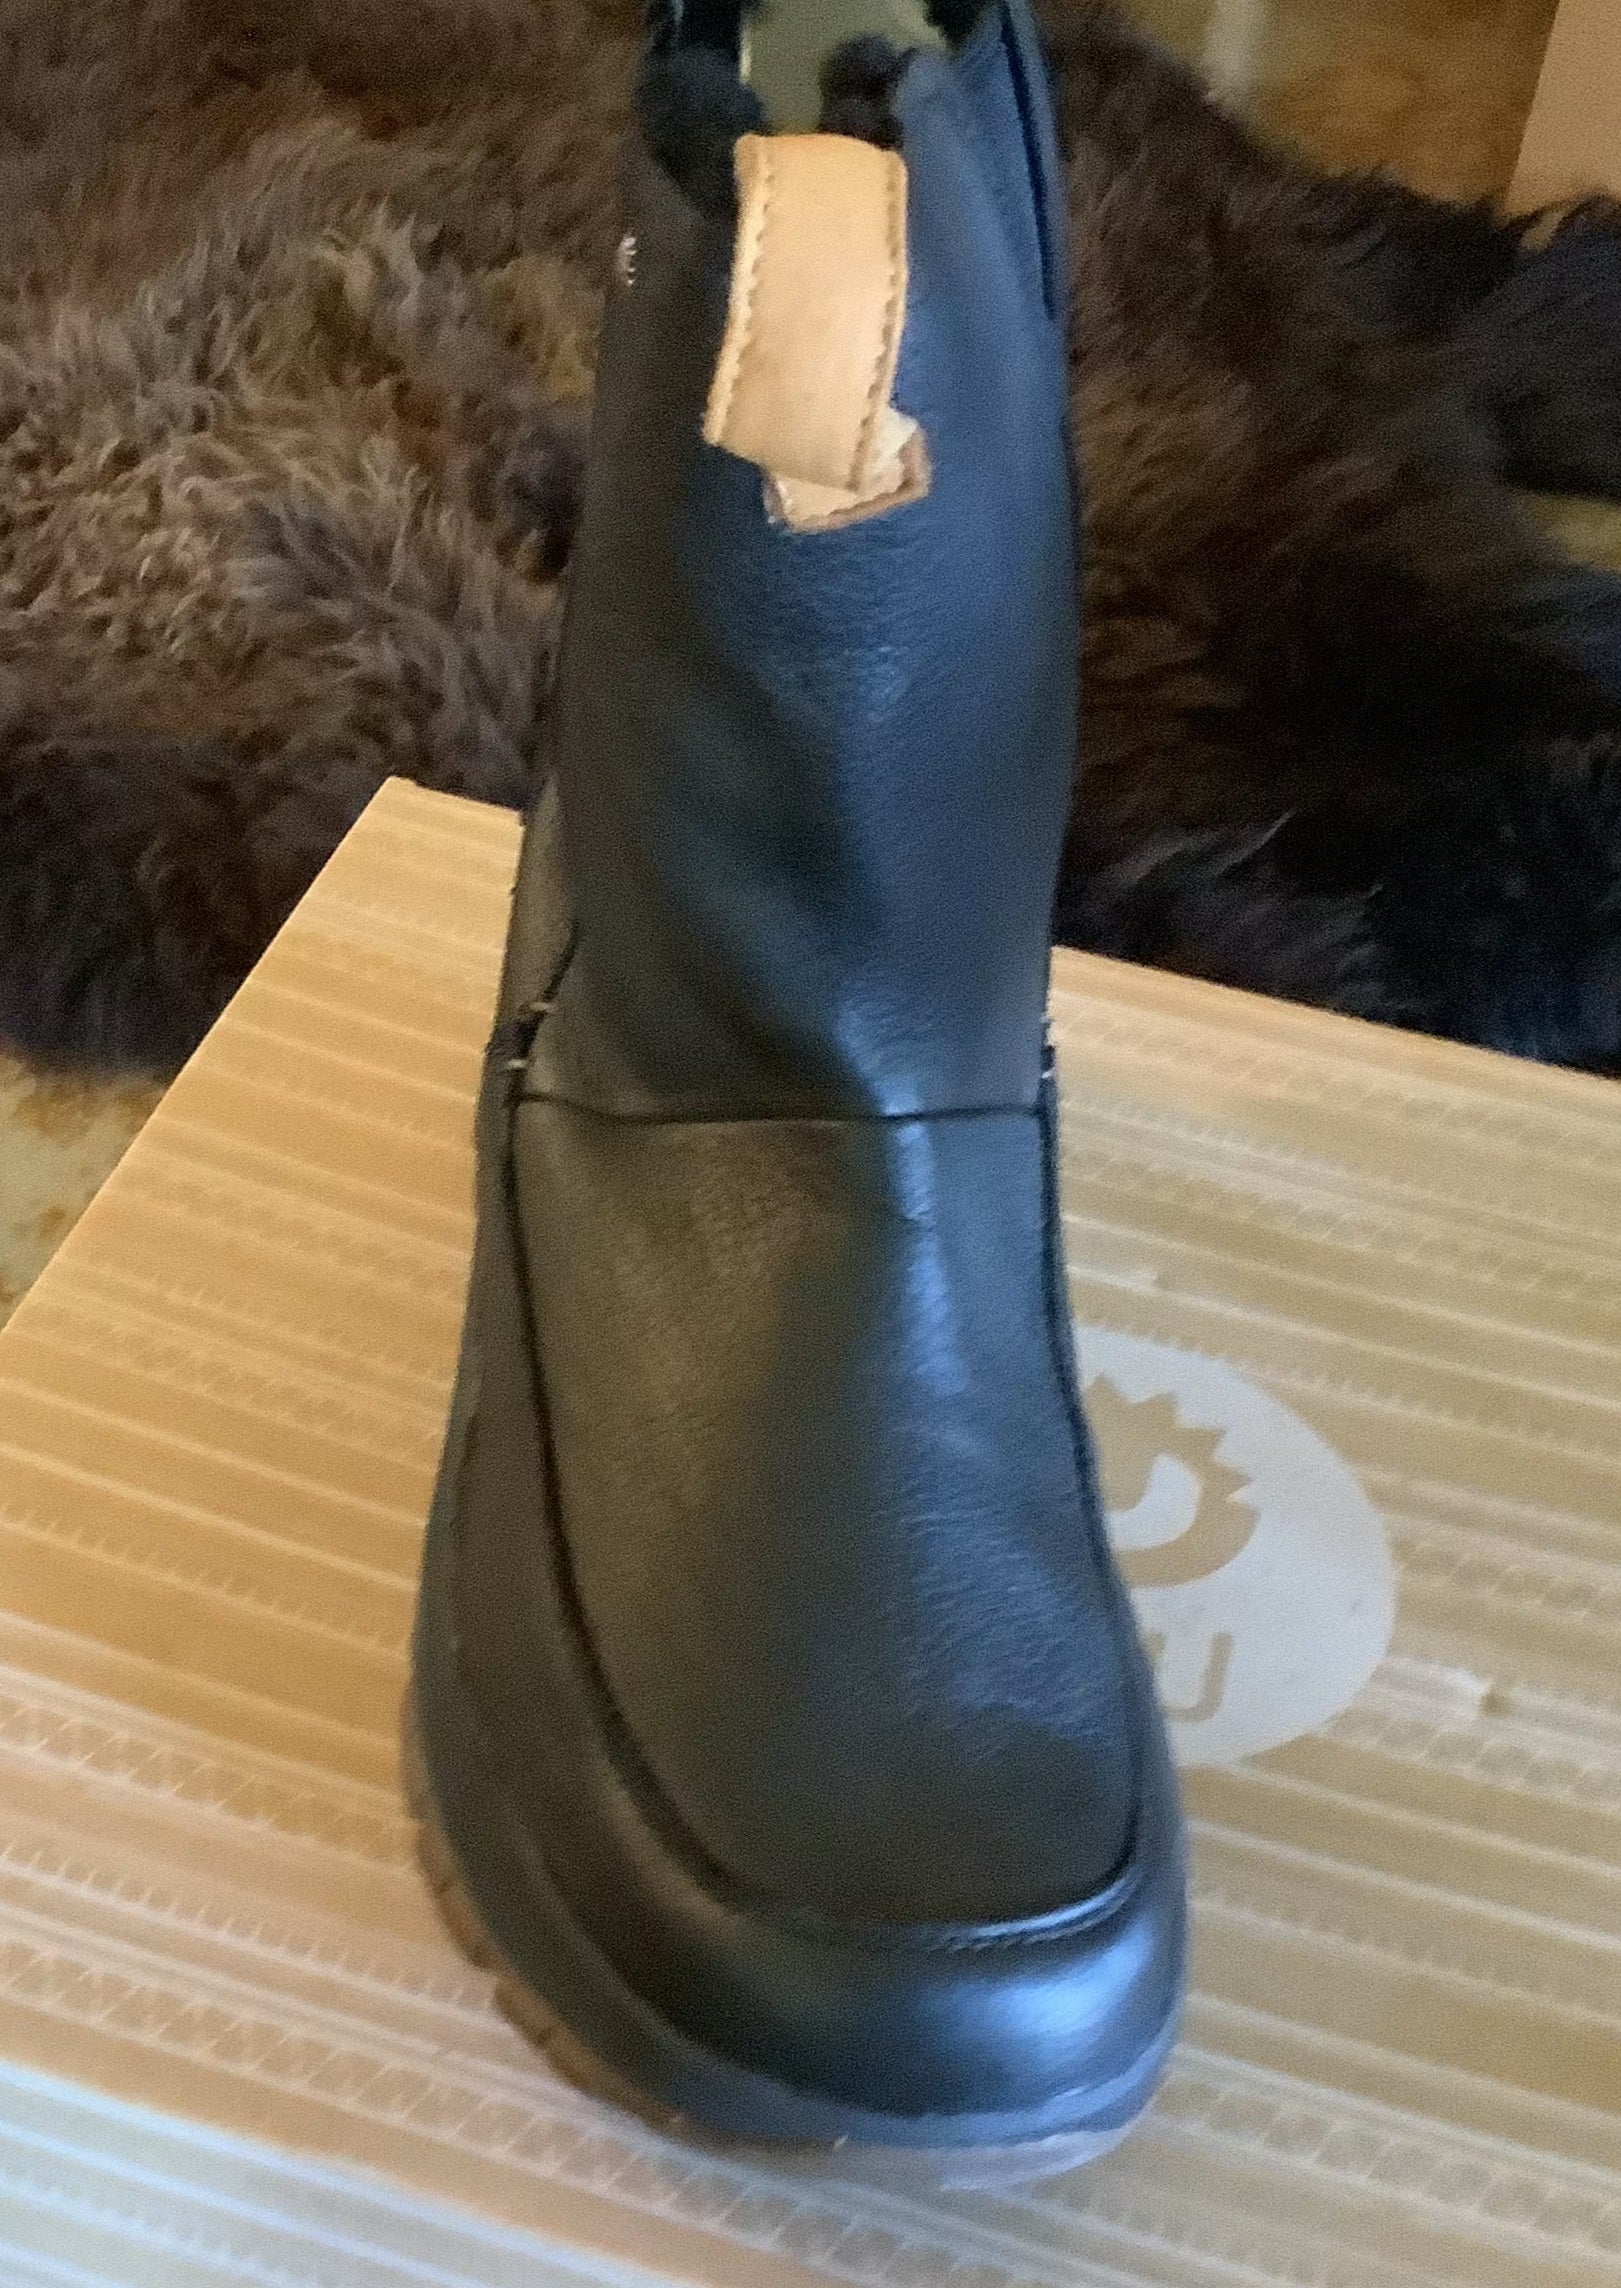 ULU - "Tupik" men's (and ladies??) bison leather/shearling lined winter boot.